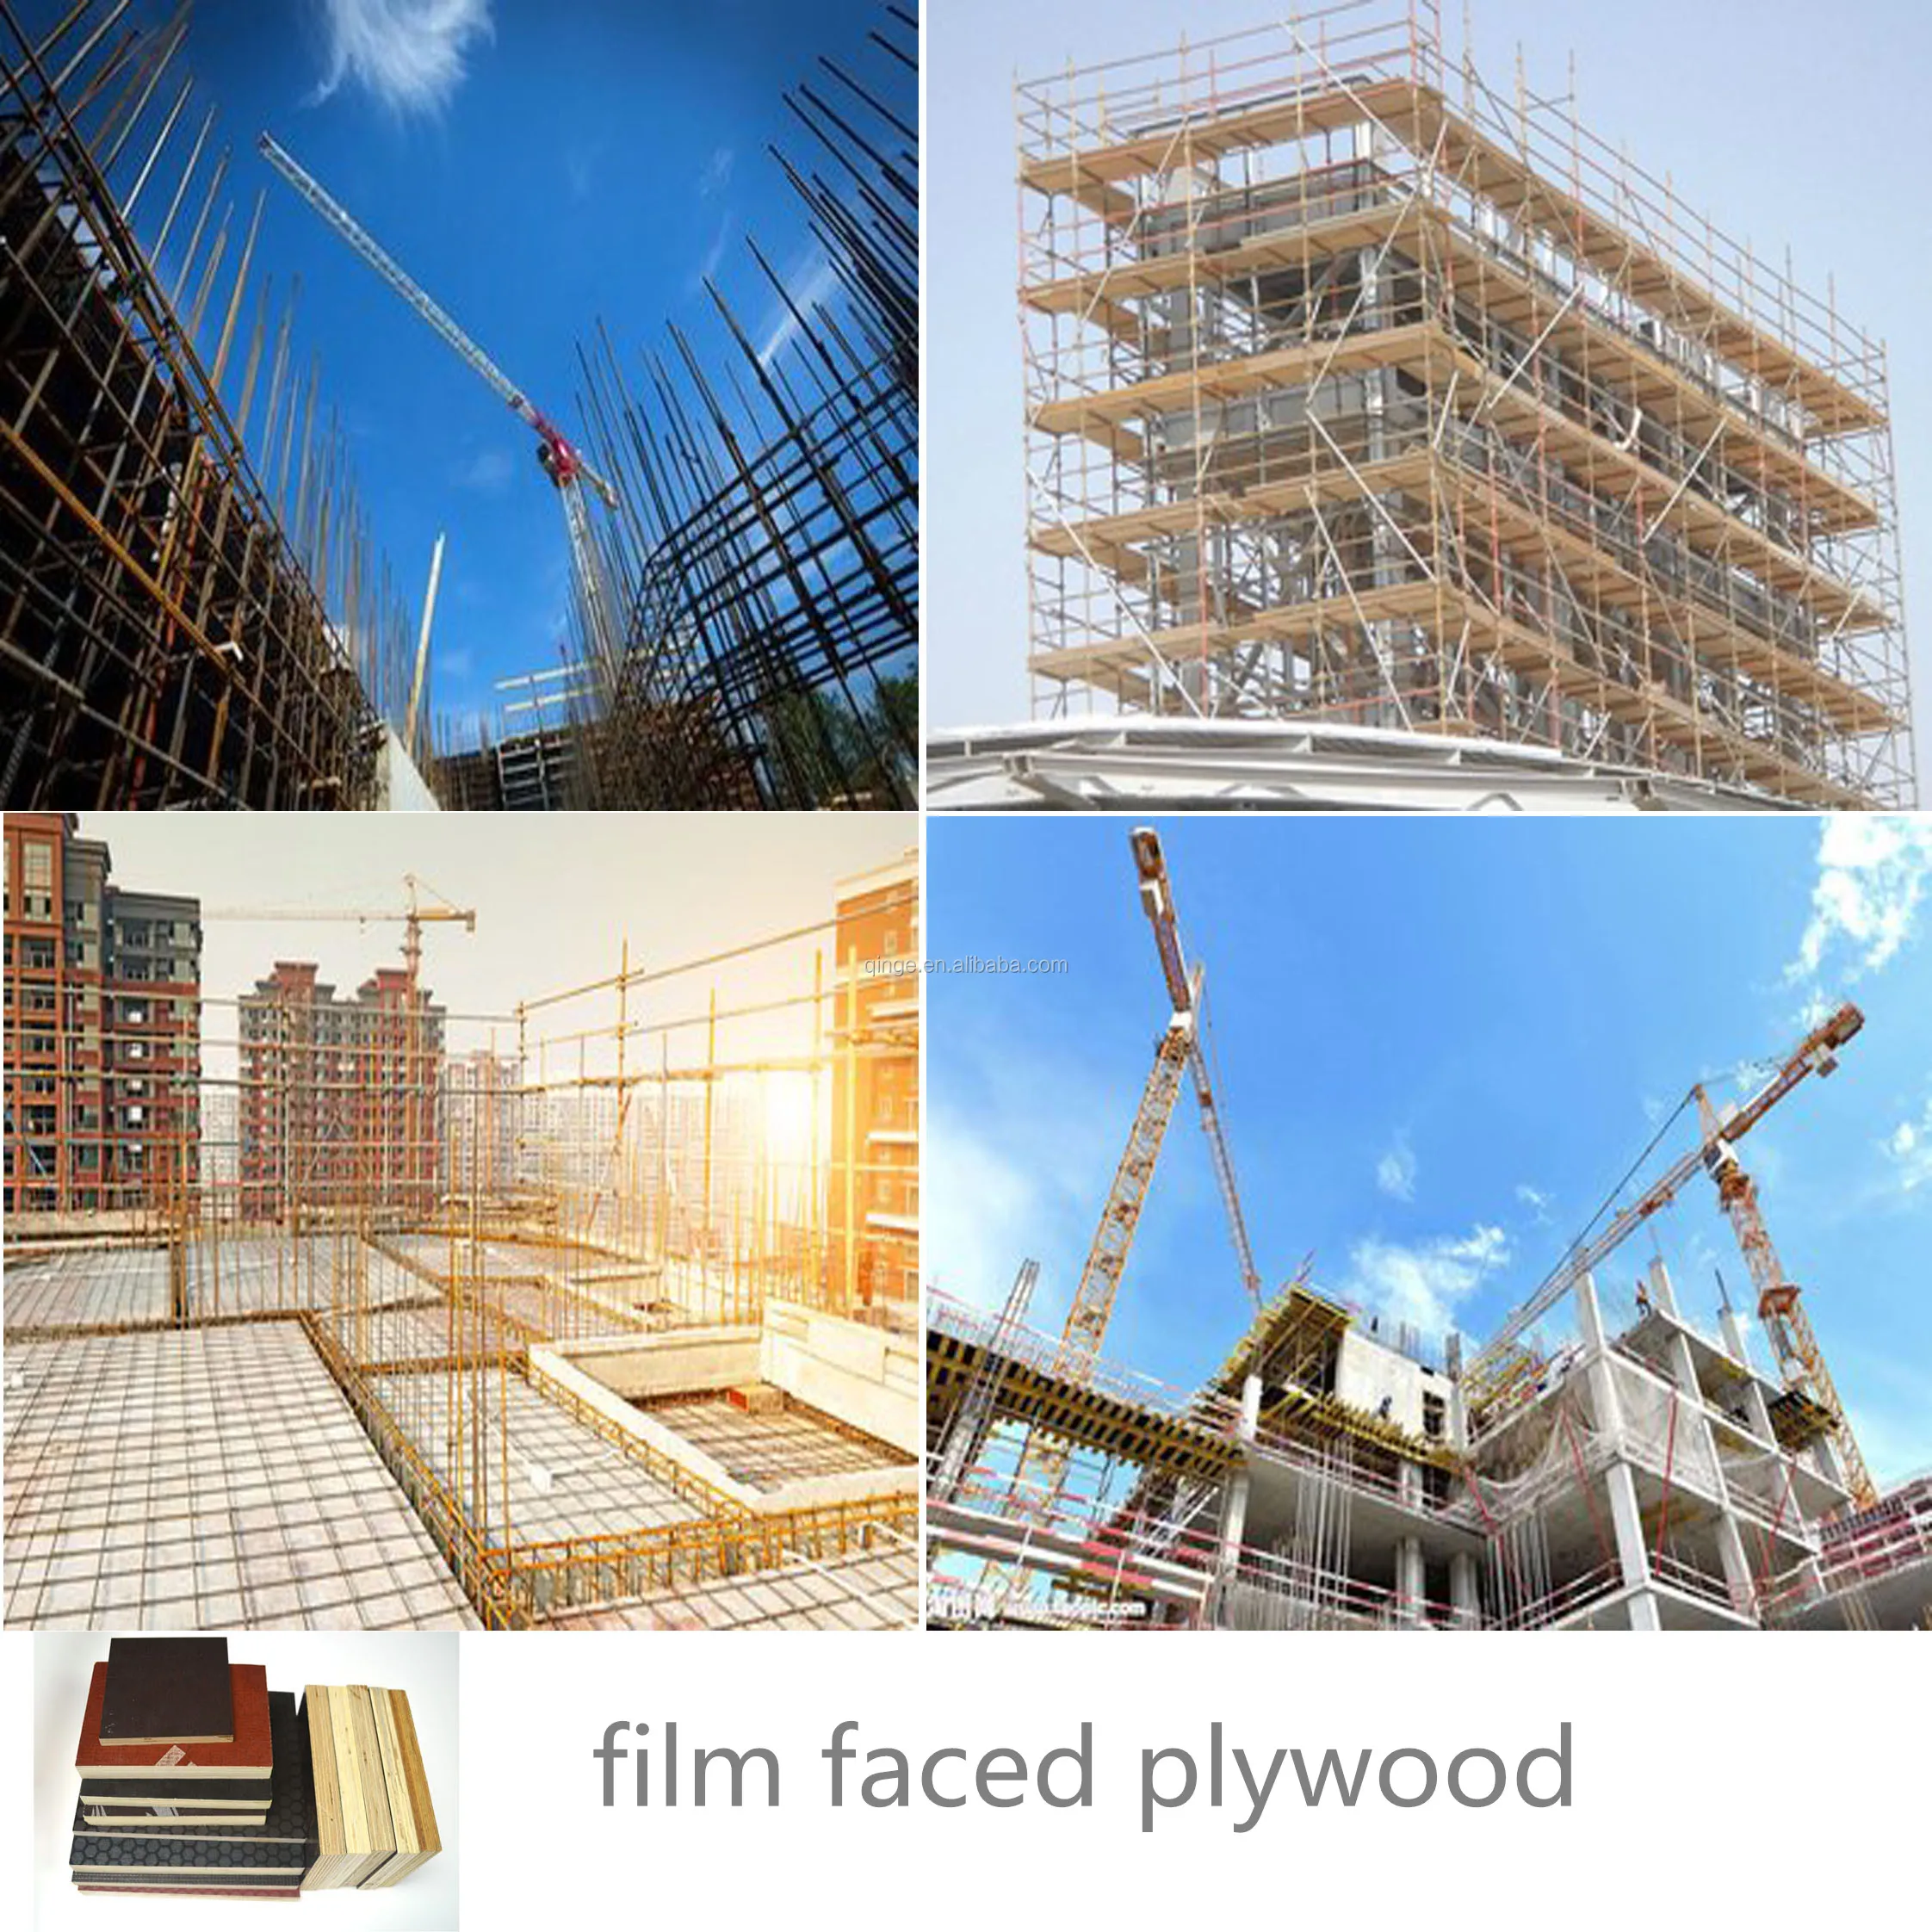 PIANO 15mm  concrete formwork plywood for construction film faced plywood hot sale indonesia /myanmar